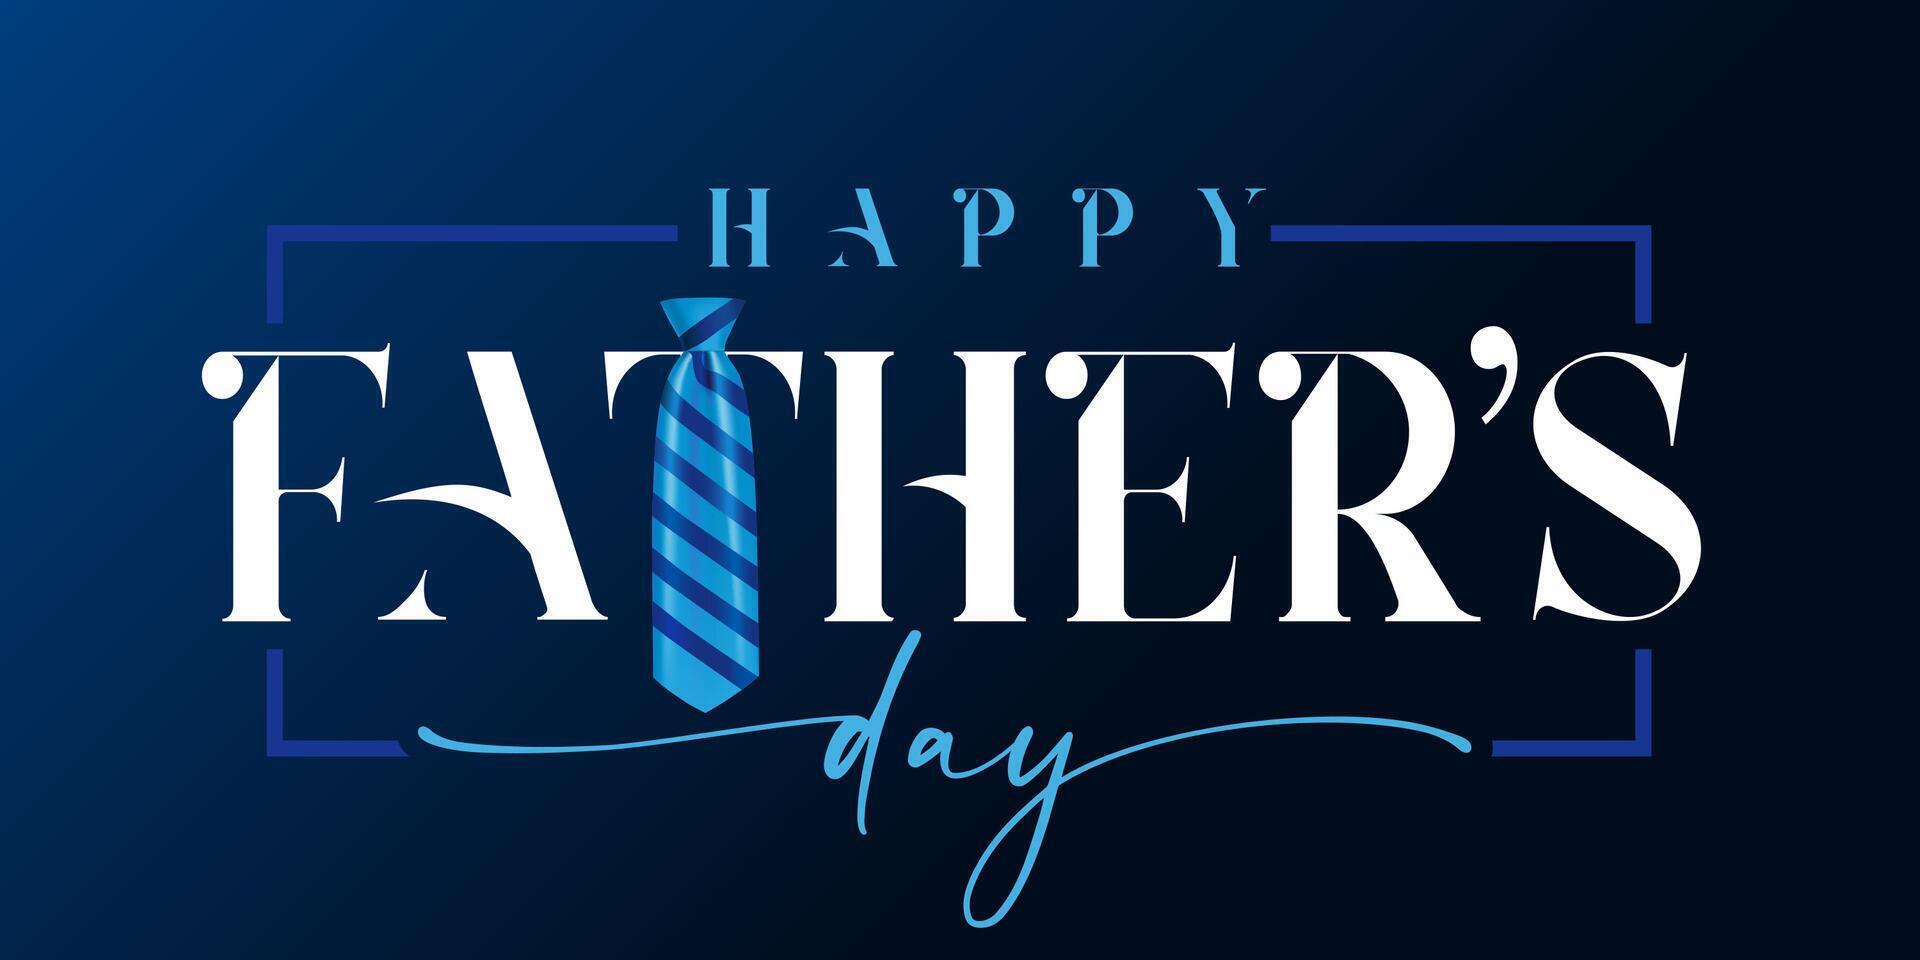 Happy Father's Day postcard creative design with 3D graphic elements vector